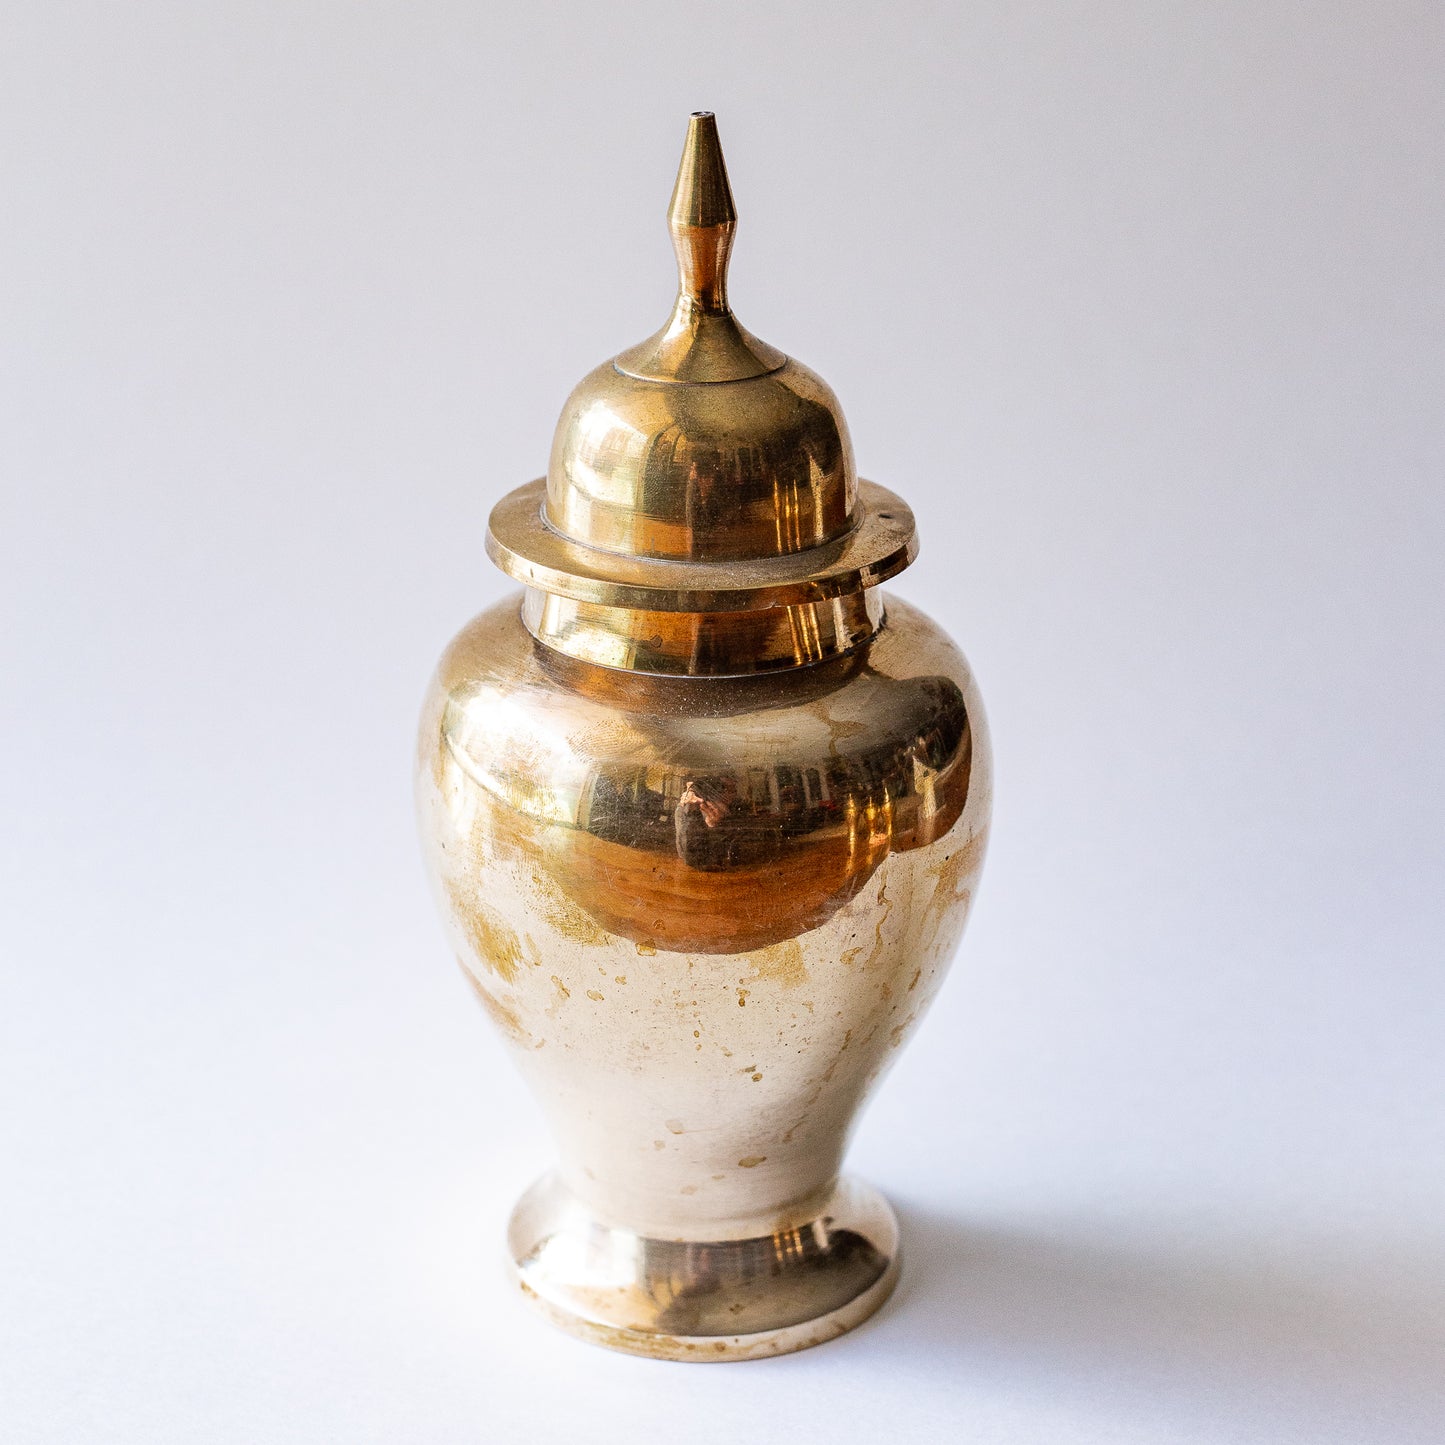 Lidded brass temple jar, measured 8 inches tall.